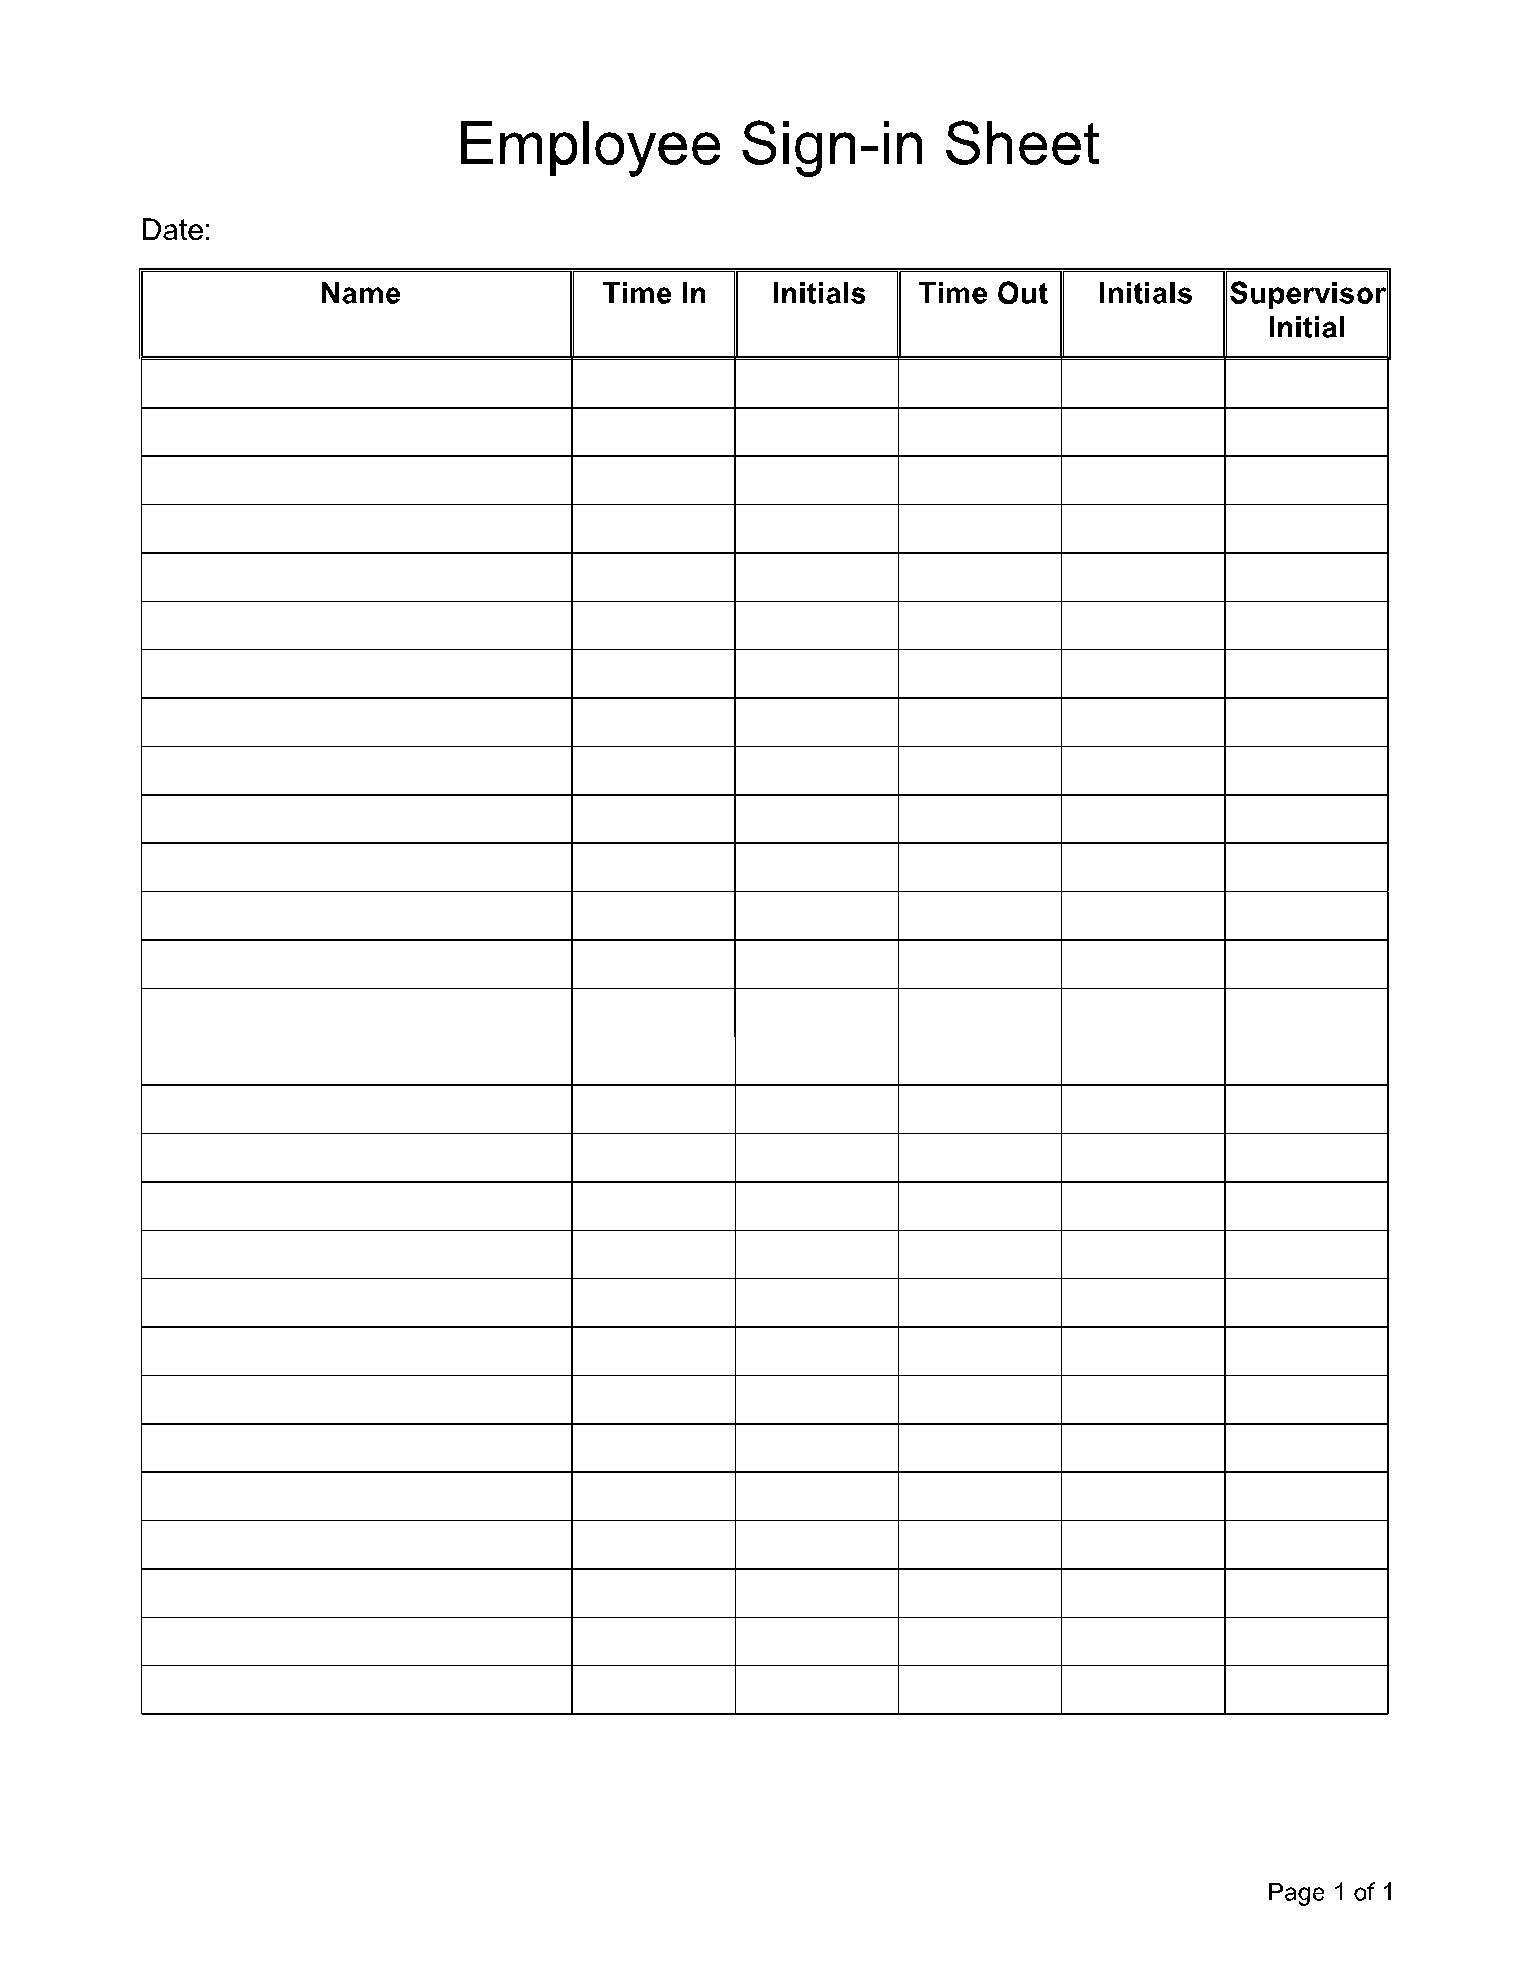 Sign in Sheet Template for Employee